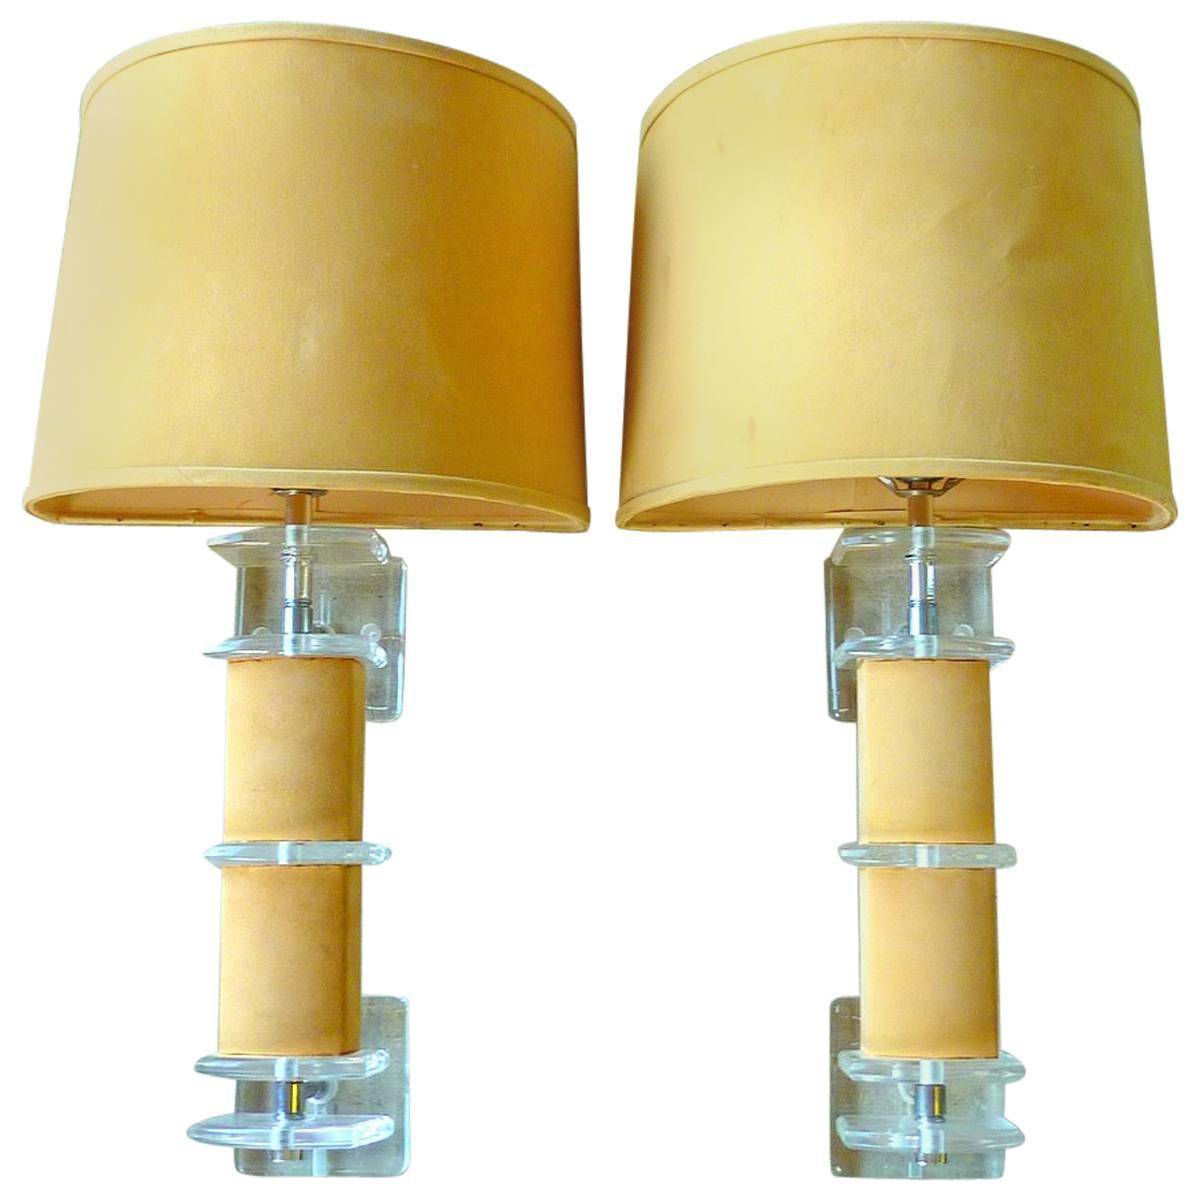 Rare Pair of Lucite and Faux Suede Sconces For Sale